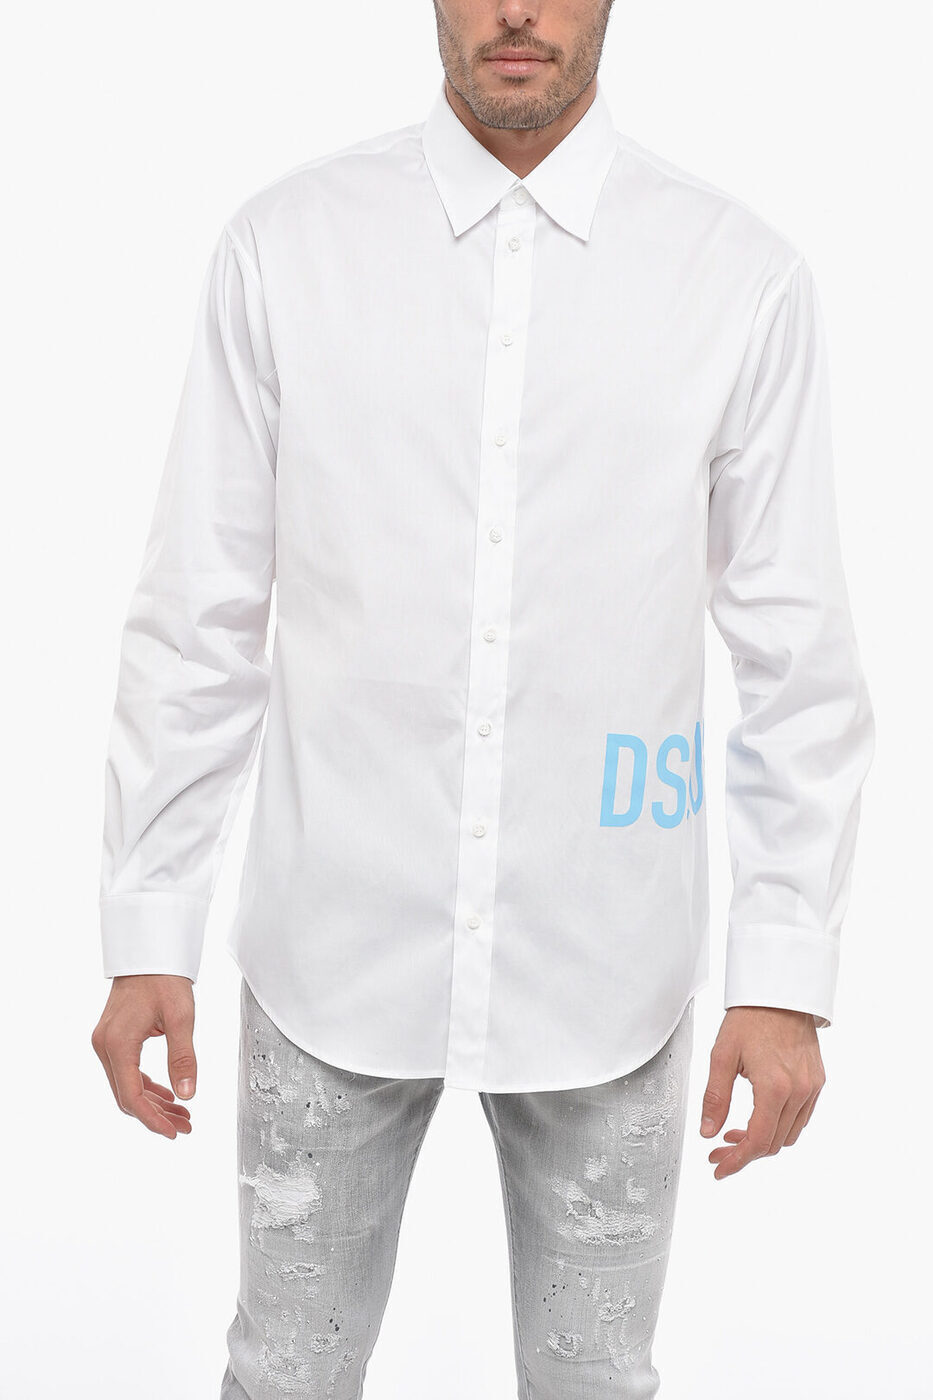 DSQUARED2 ディースクエアード シャツ S71DM0633 S44131 100 メンズ DROPPED SHOULDER COTTON SHIRT WITH PRINTED LOGO  dk